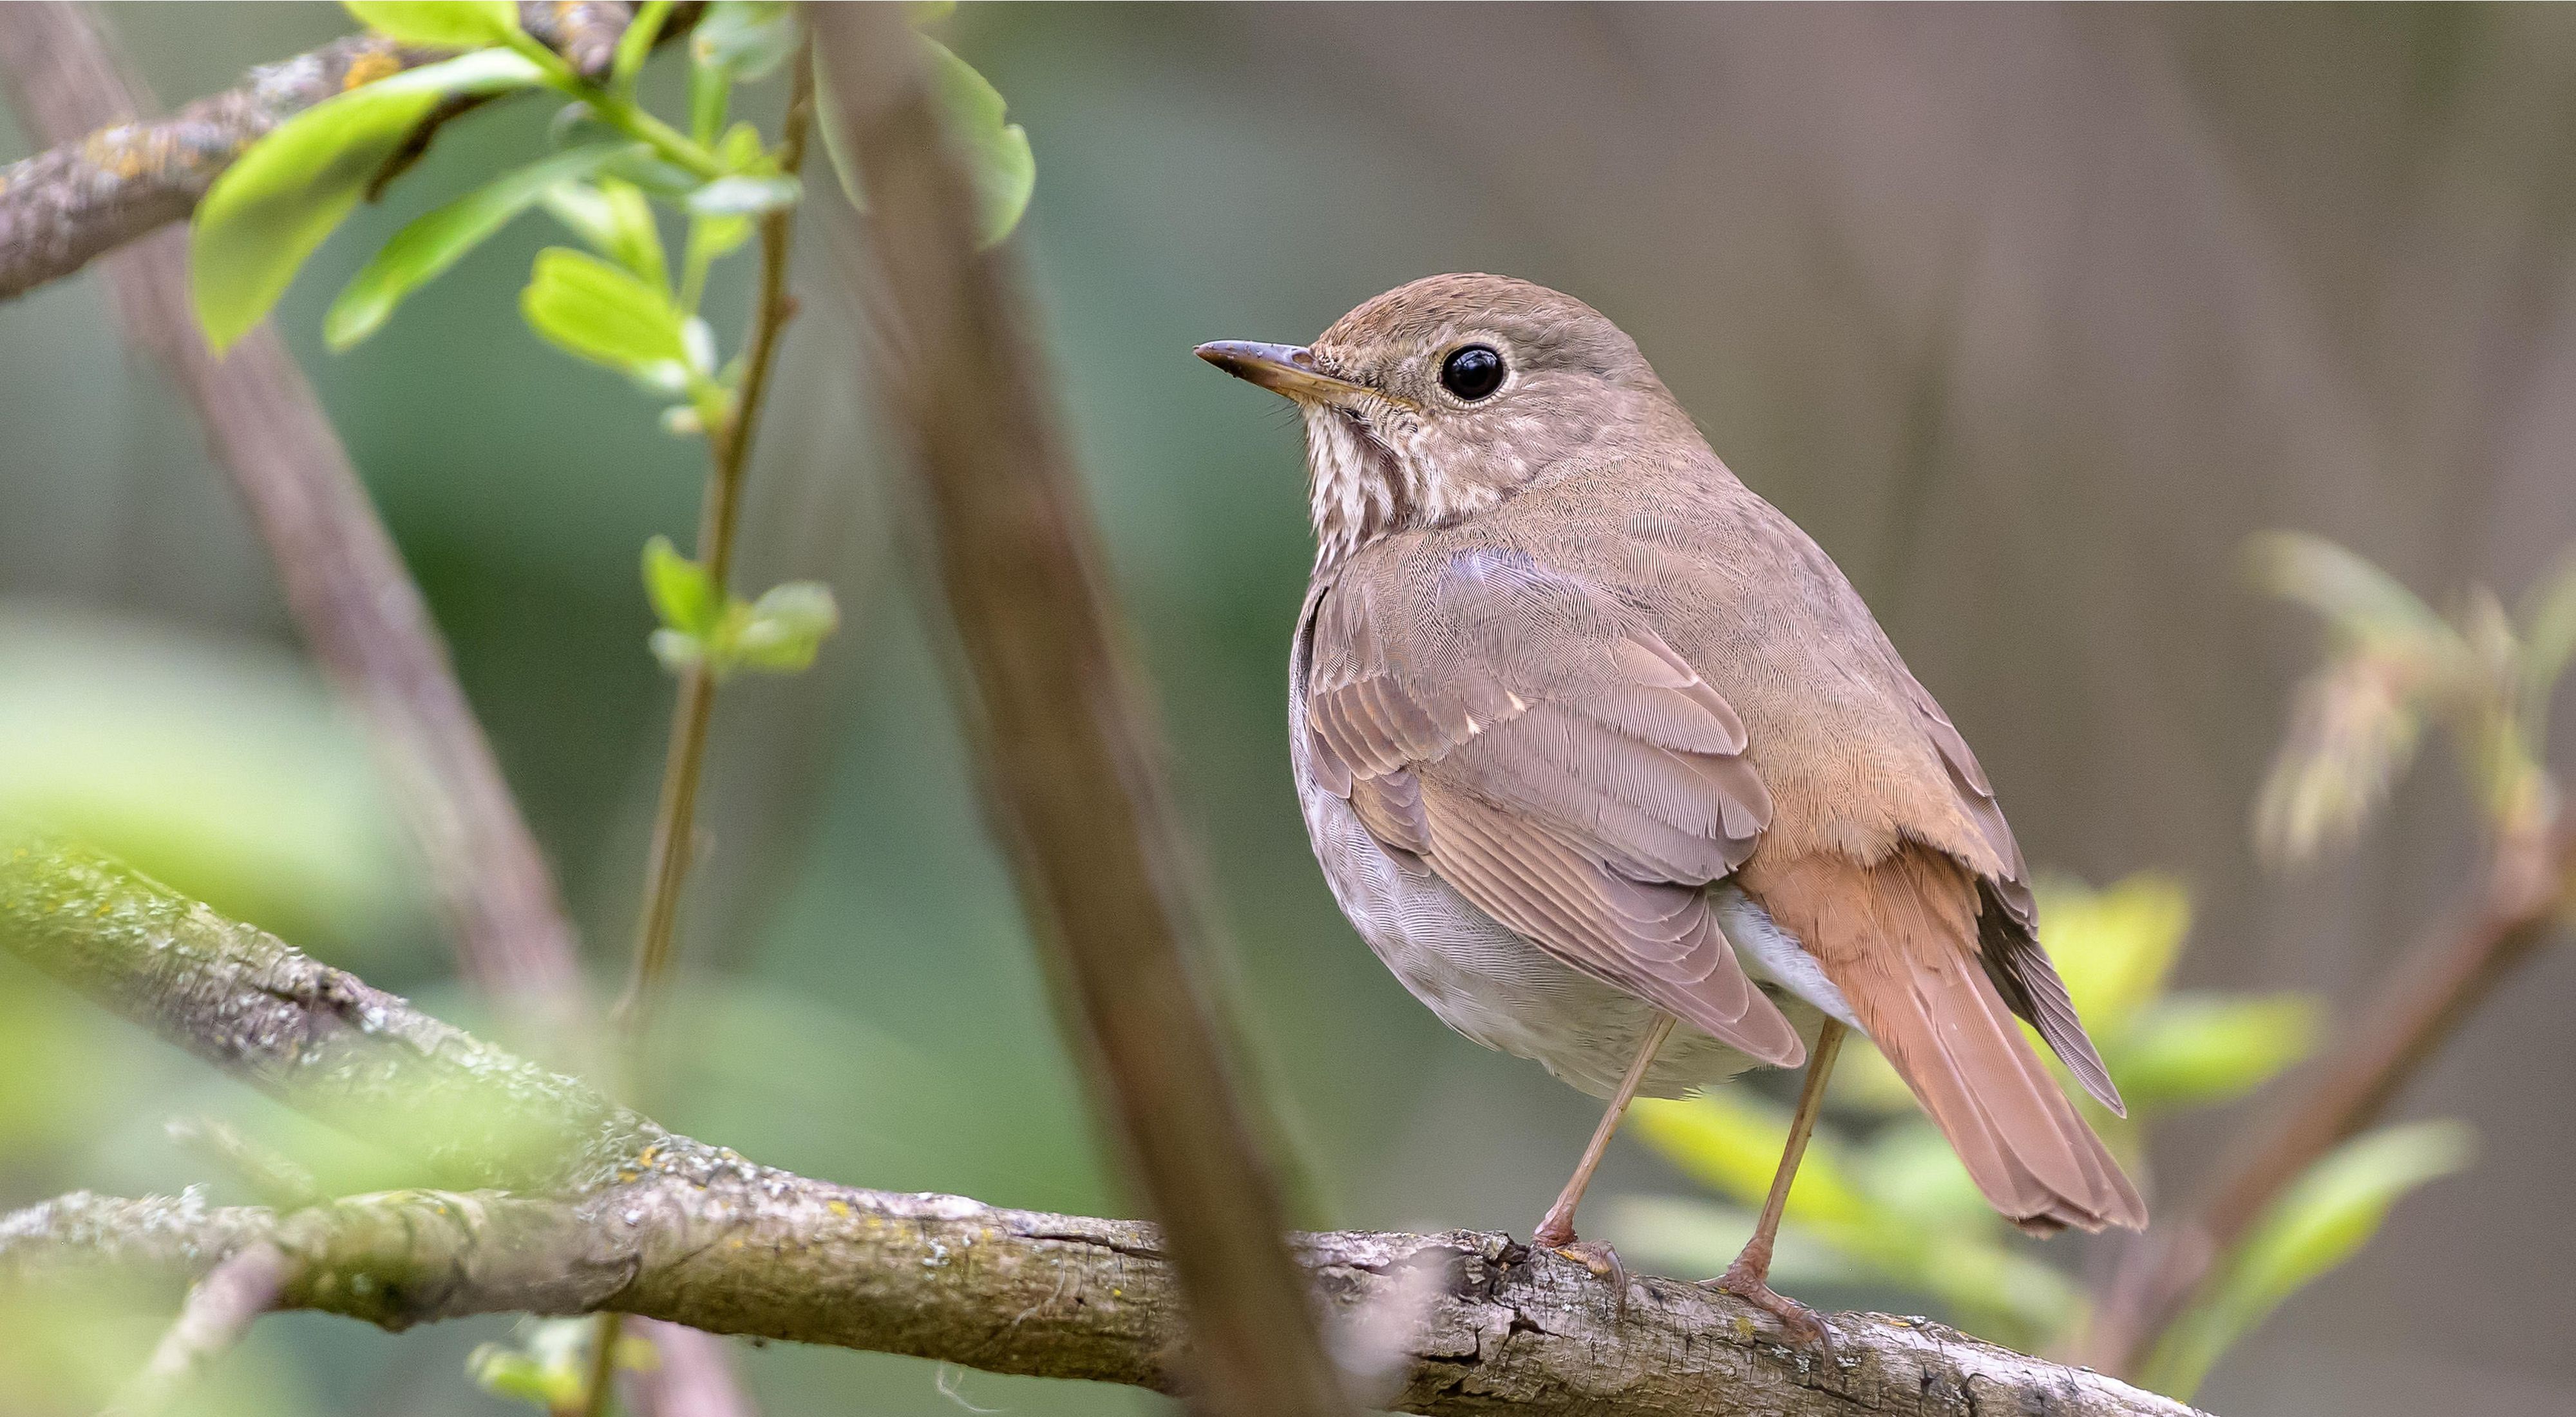 The hermit thrush can be found at the David H. Smith Preserve.